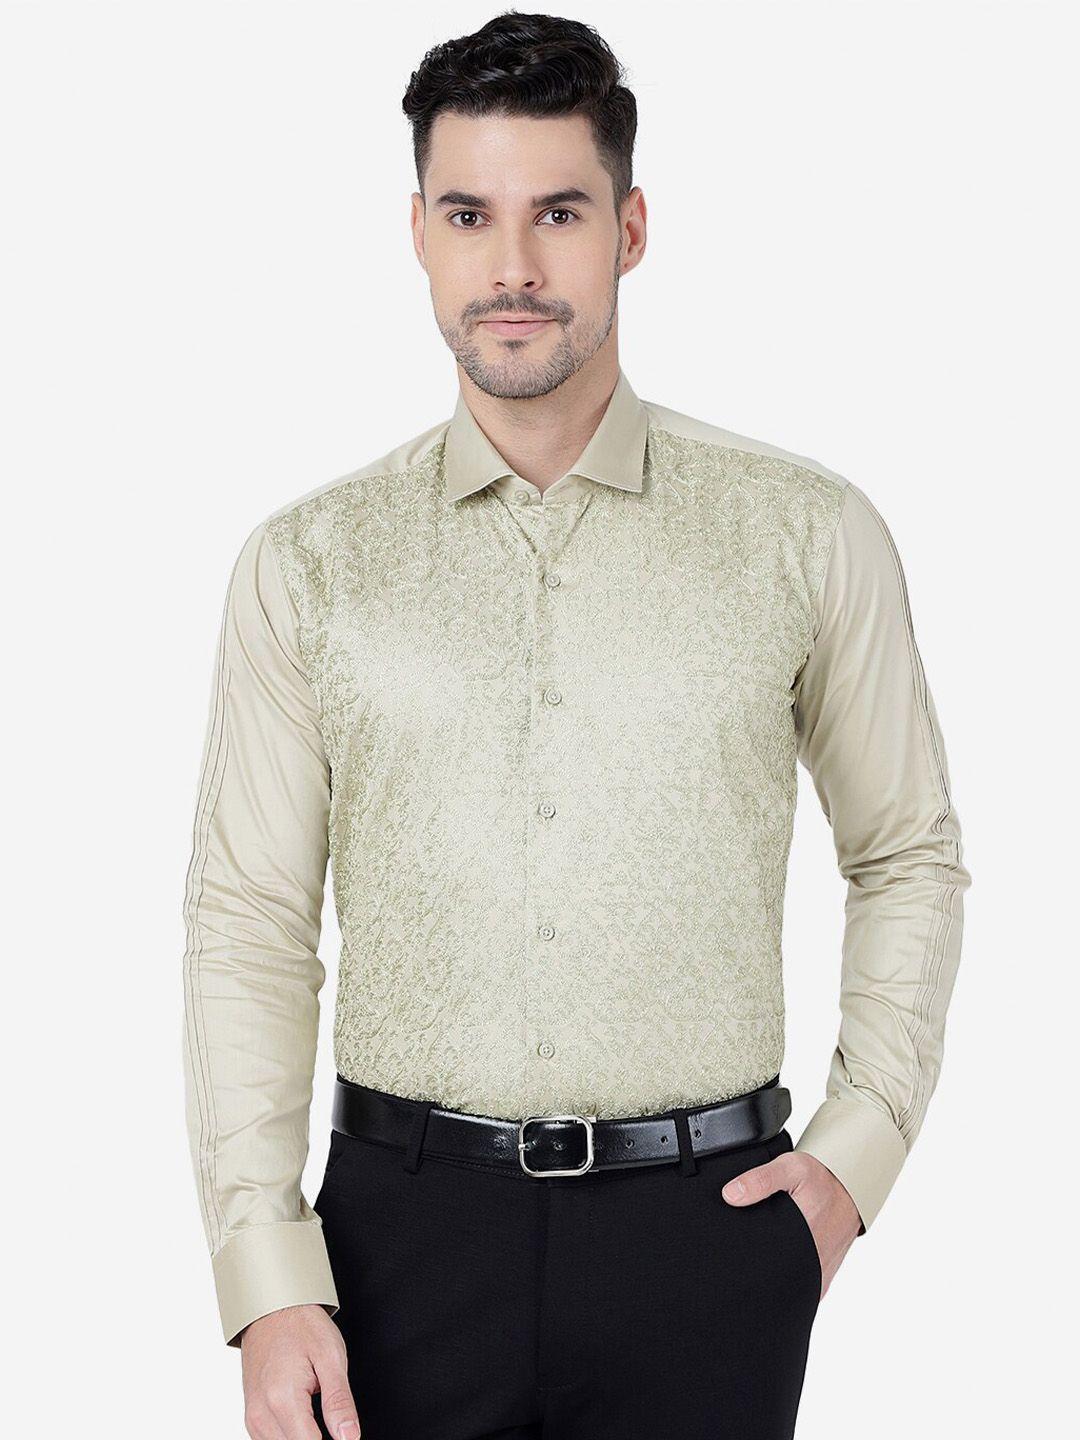 jb-studio-slim-fit-embroidered-party-shirt